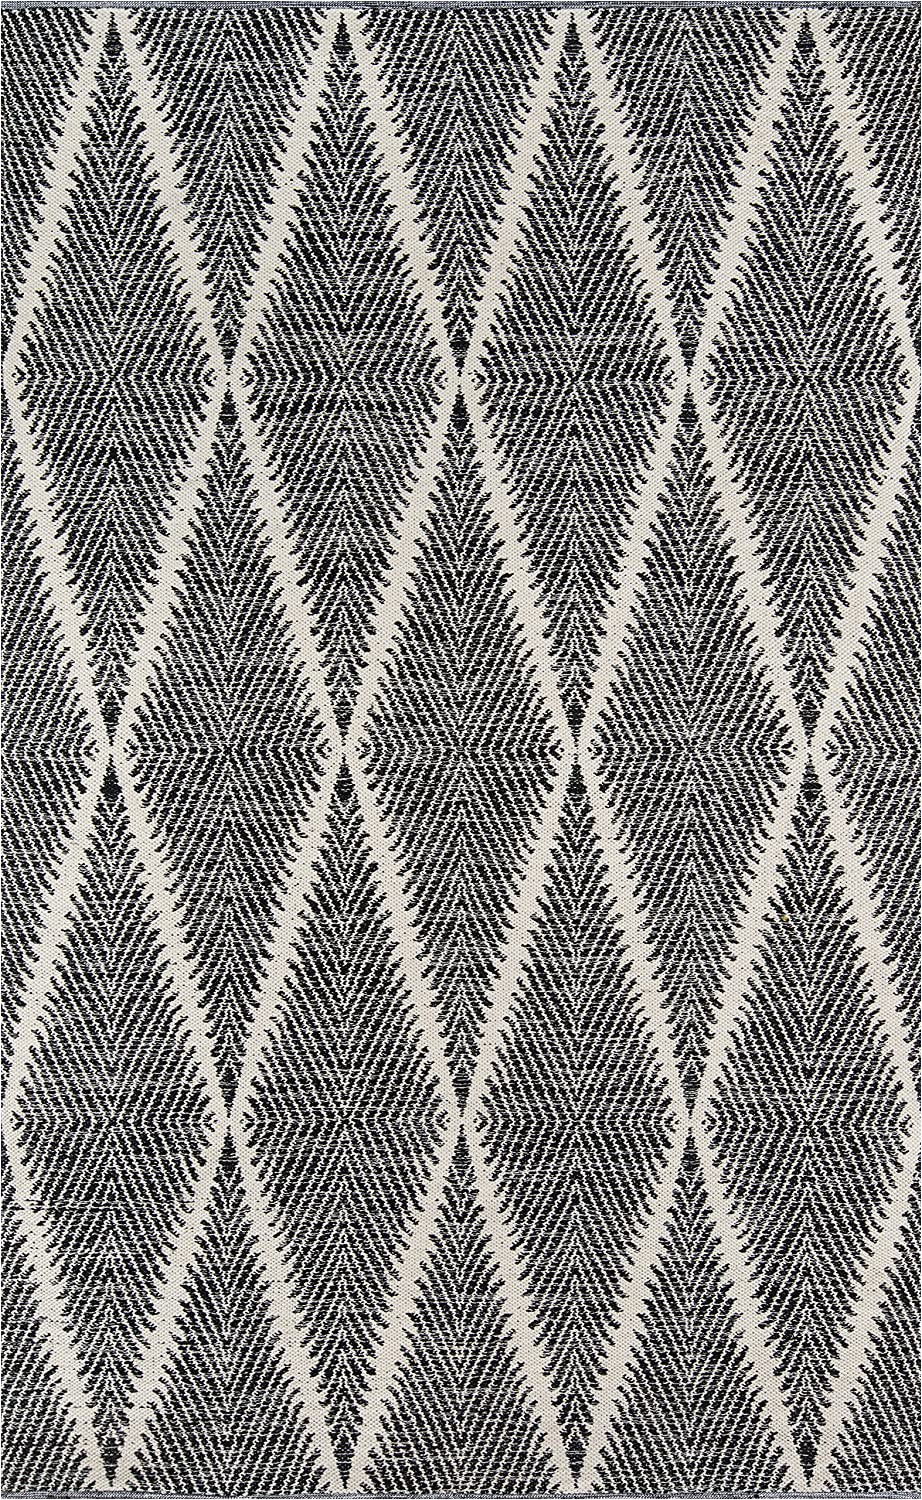 Black and White Woven area Rug Erin Gates by Momeni River Beacon Black Hand Woven Indoor Outdoor area Rug 5 X 7 6"